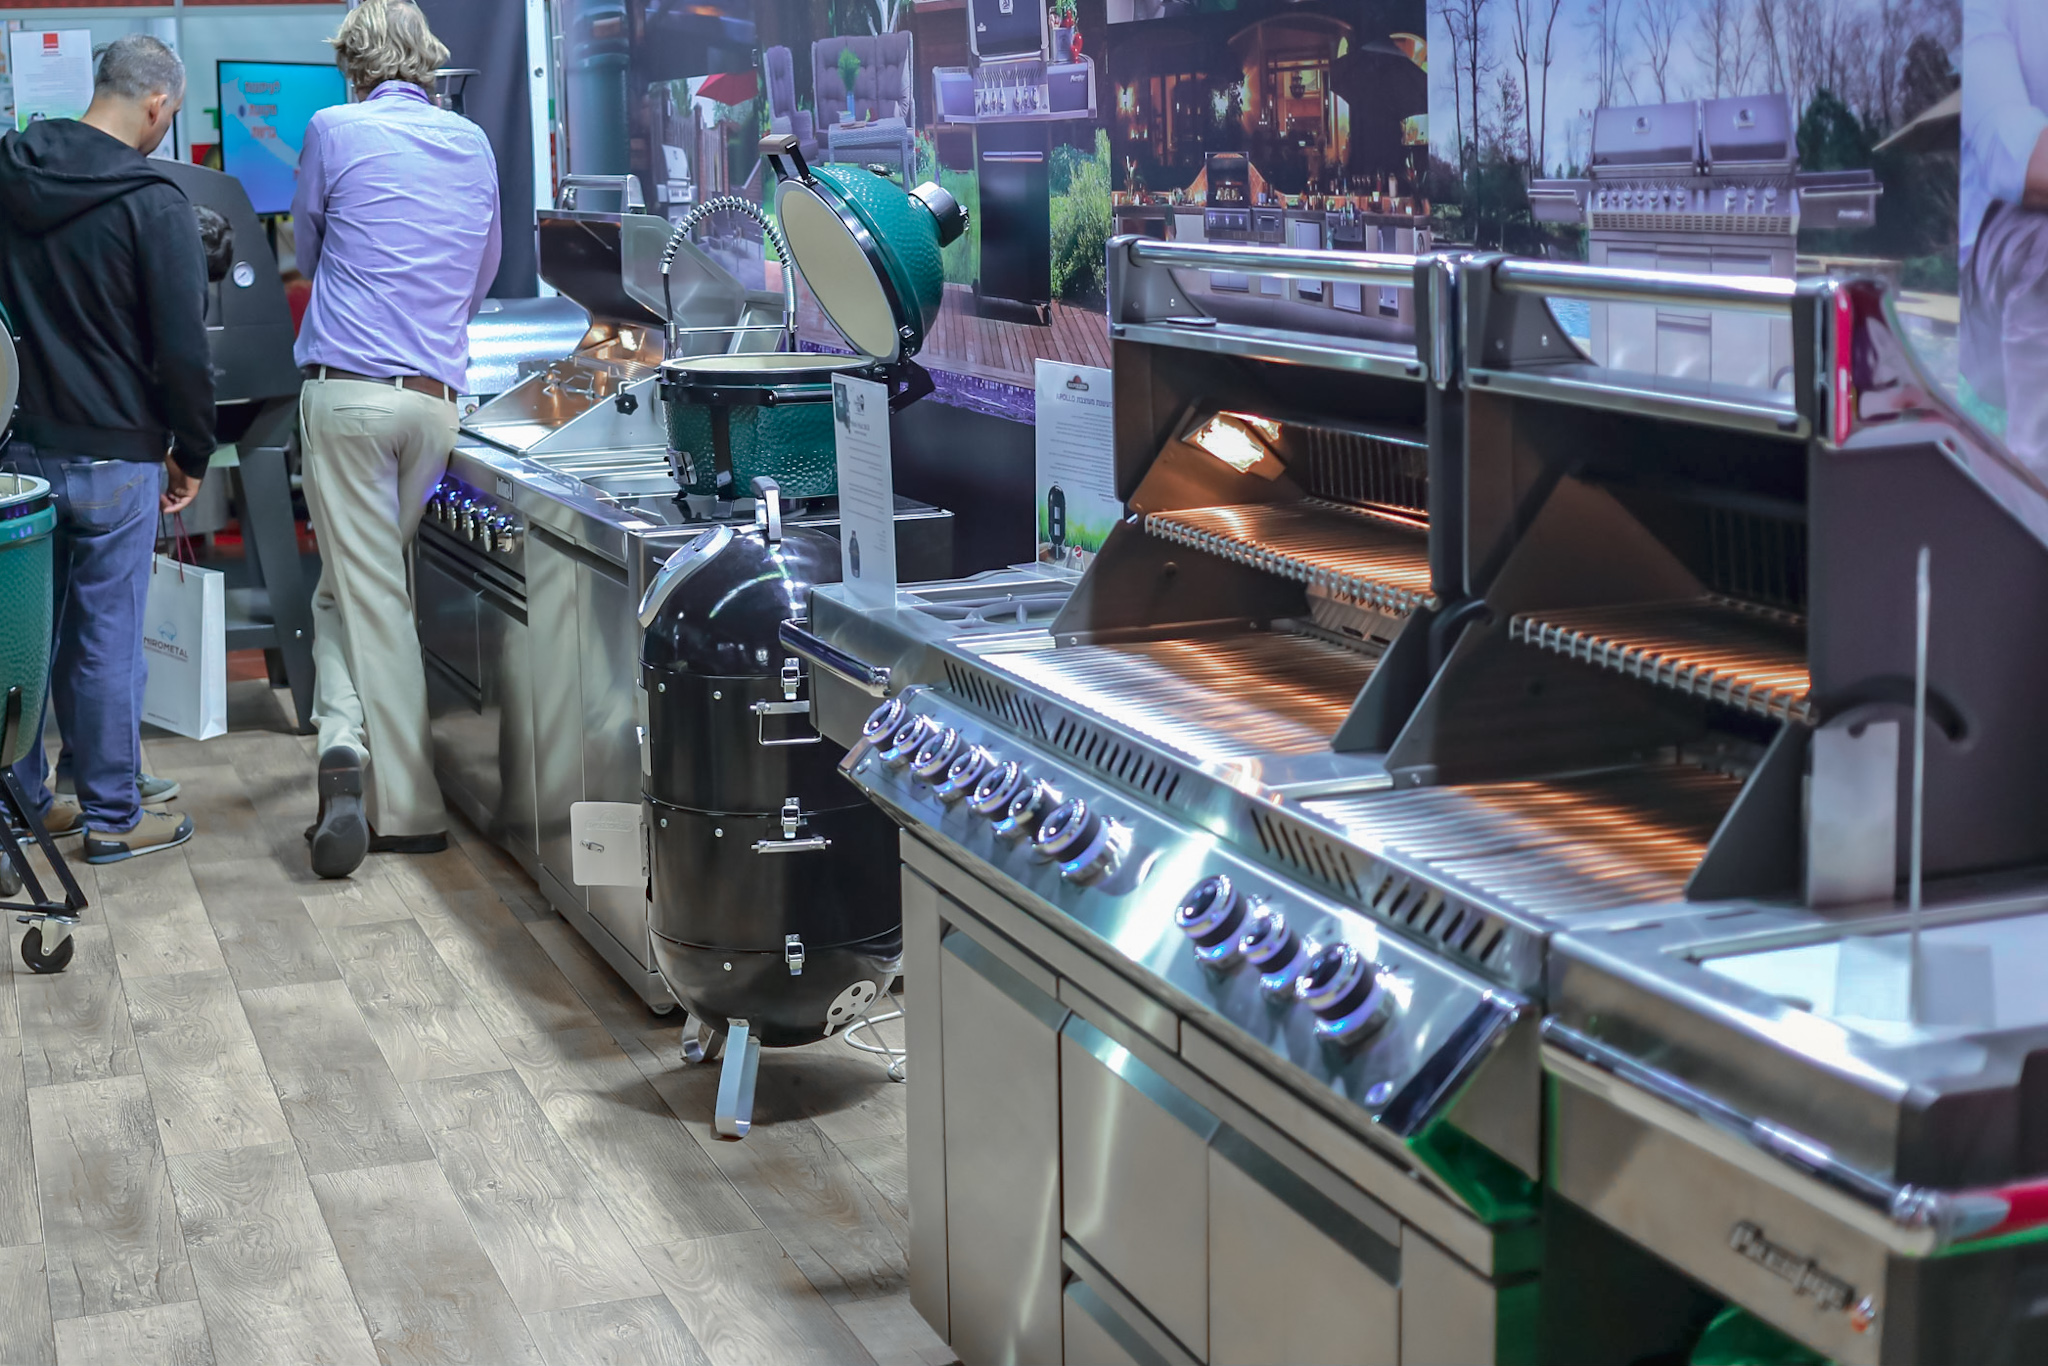 2021 North American Association of Food Equipment Manufacturers show (NAFEM 2021), Feb. 4 – 6, 2021, New Orleans Ernest N. Morial Convention Center